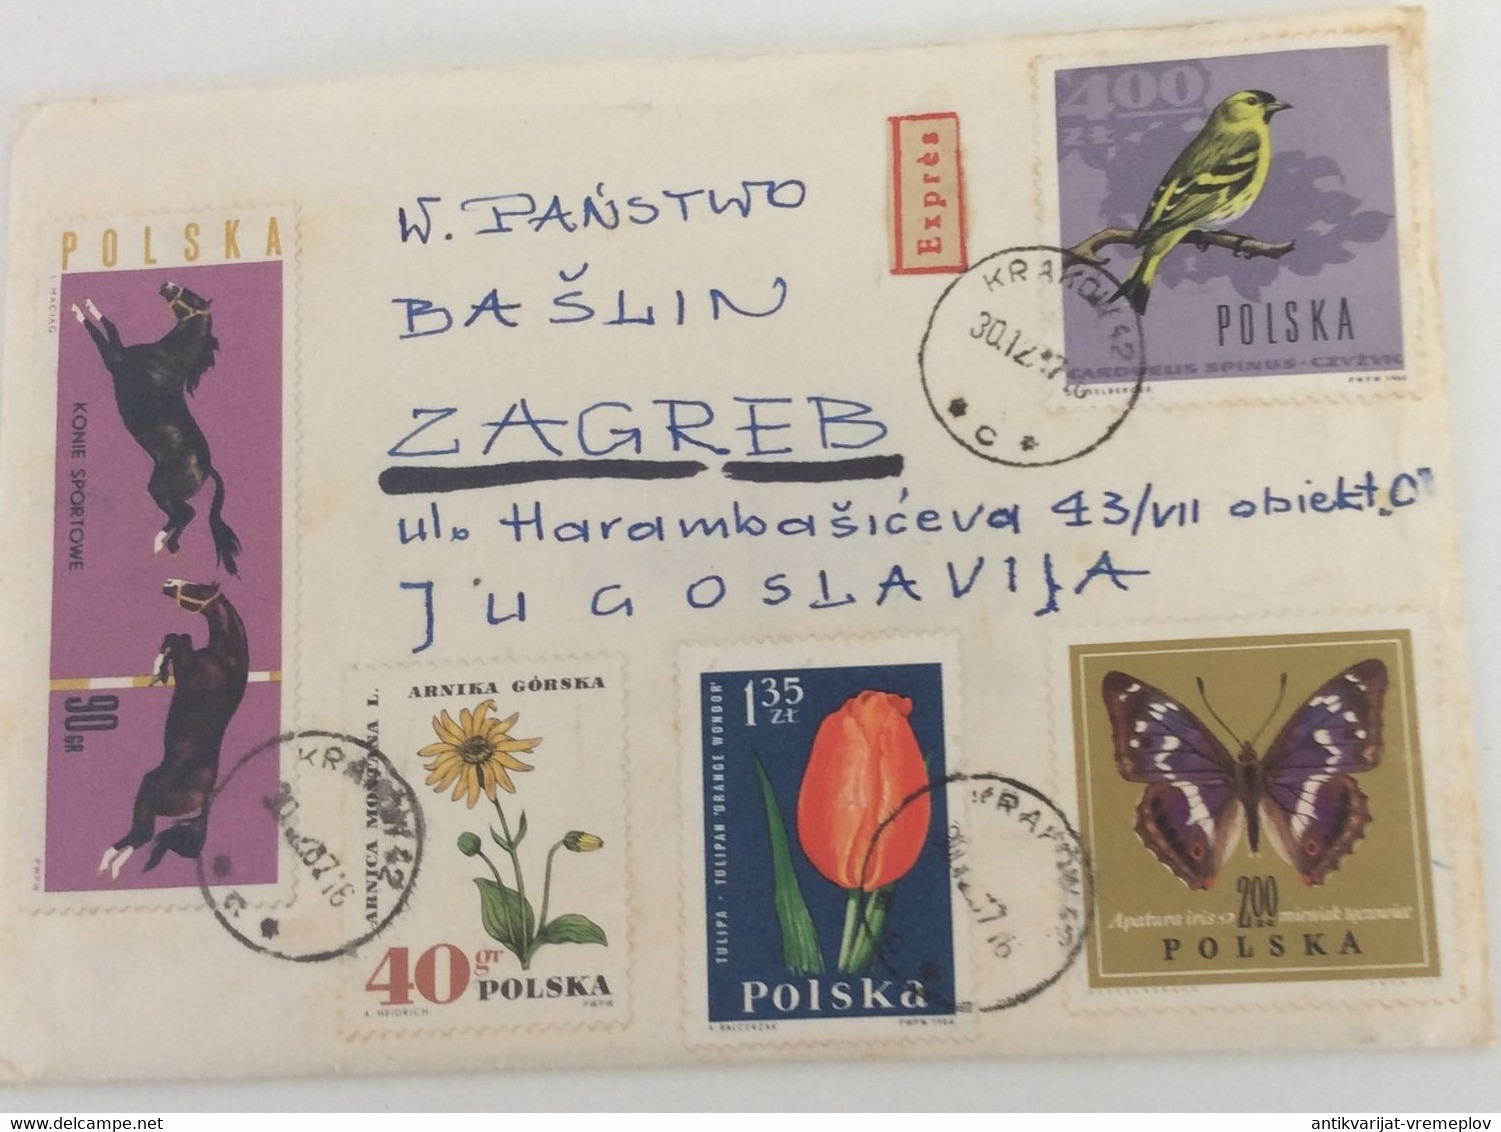 Poland Republic > 1971-80 > Covers POLSKA KRAKOW  TO ZAGREB 1968. COVER WITH 5 STAMPS - Covers & Documents